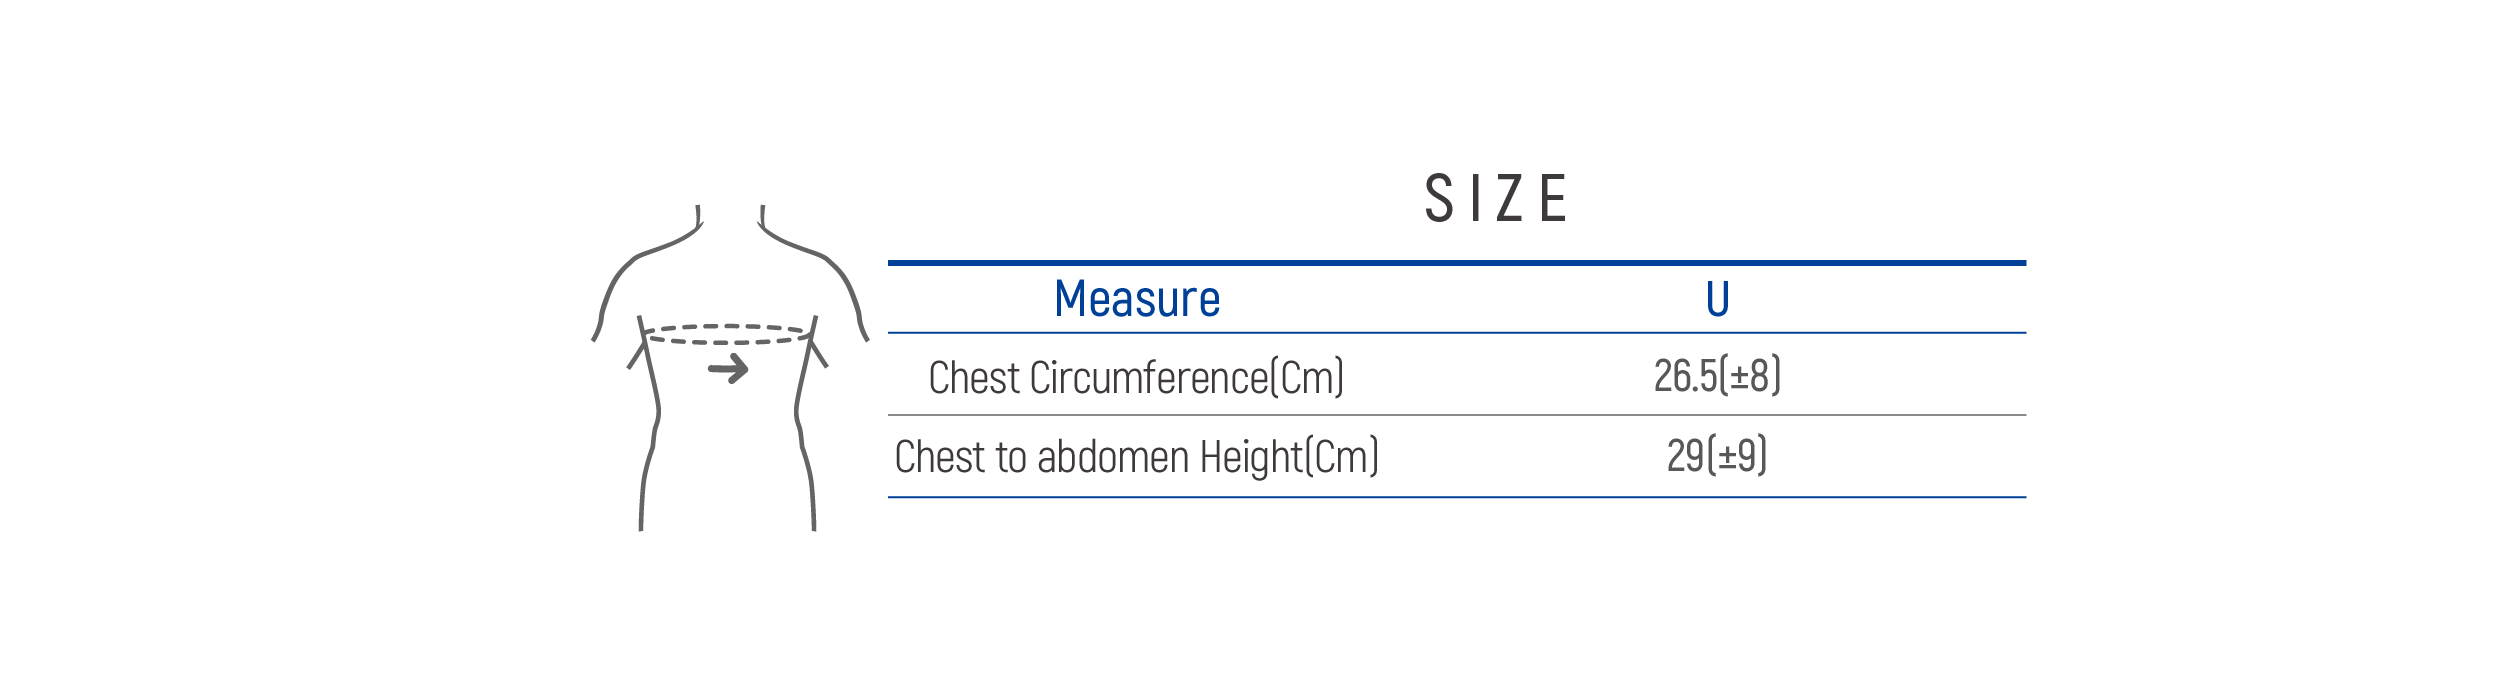 DR-C001 Size table image